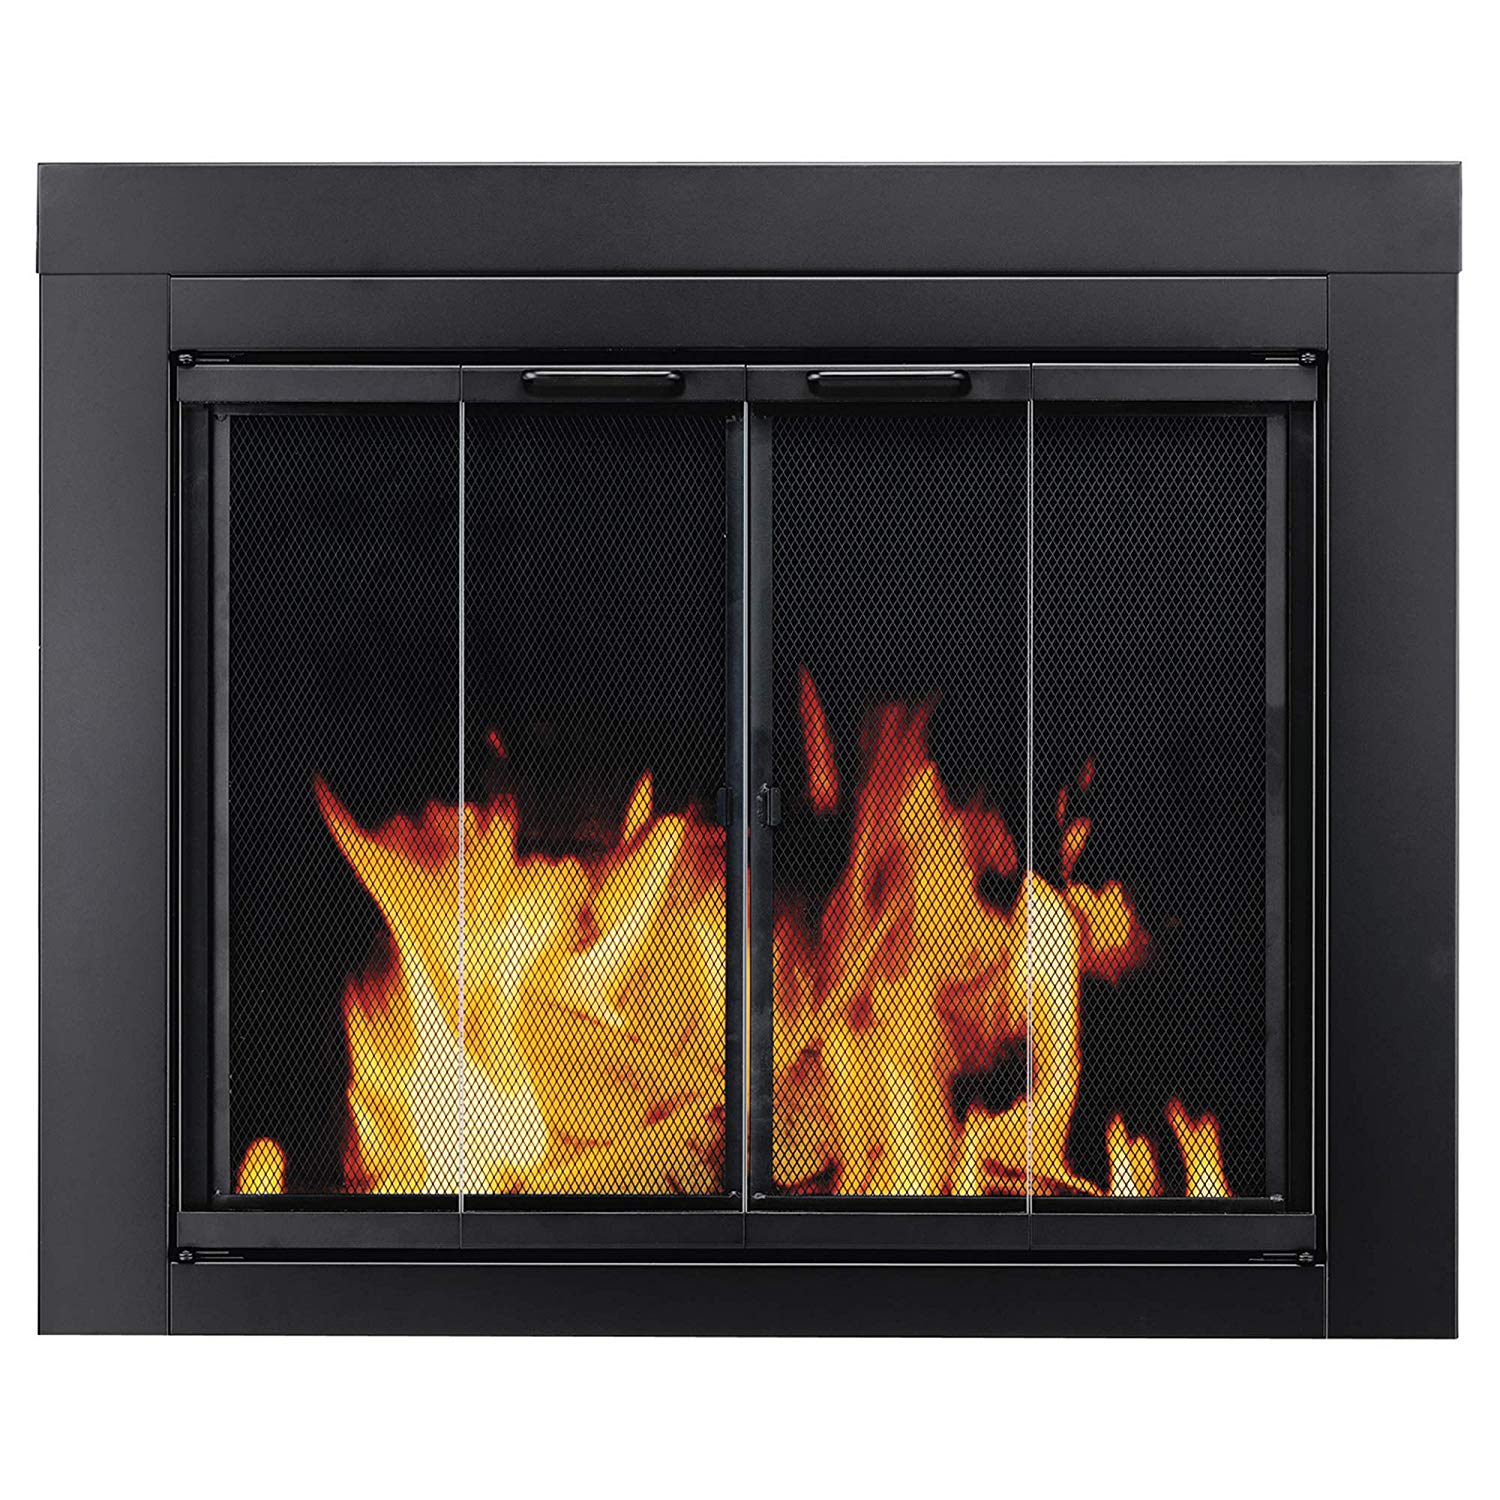 Wall Fireplace Amazon Unique Pleasant Hearth at 1000 ascot Fireplace Glass Door Black Small